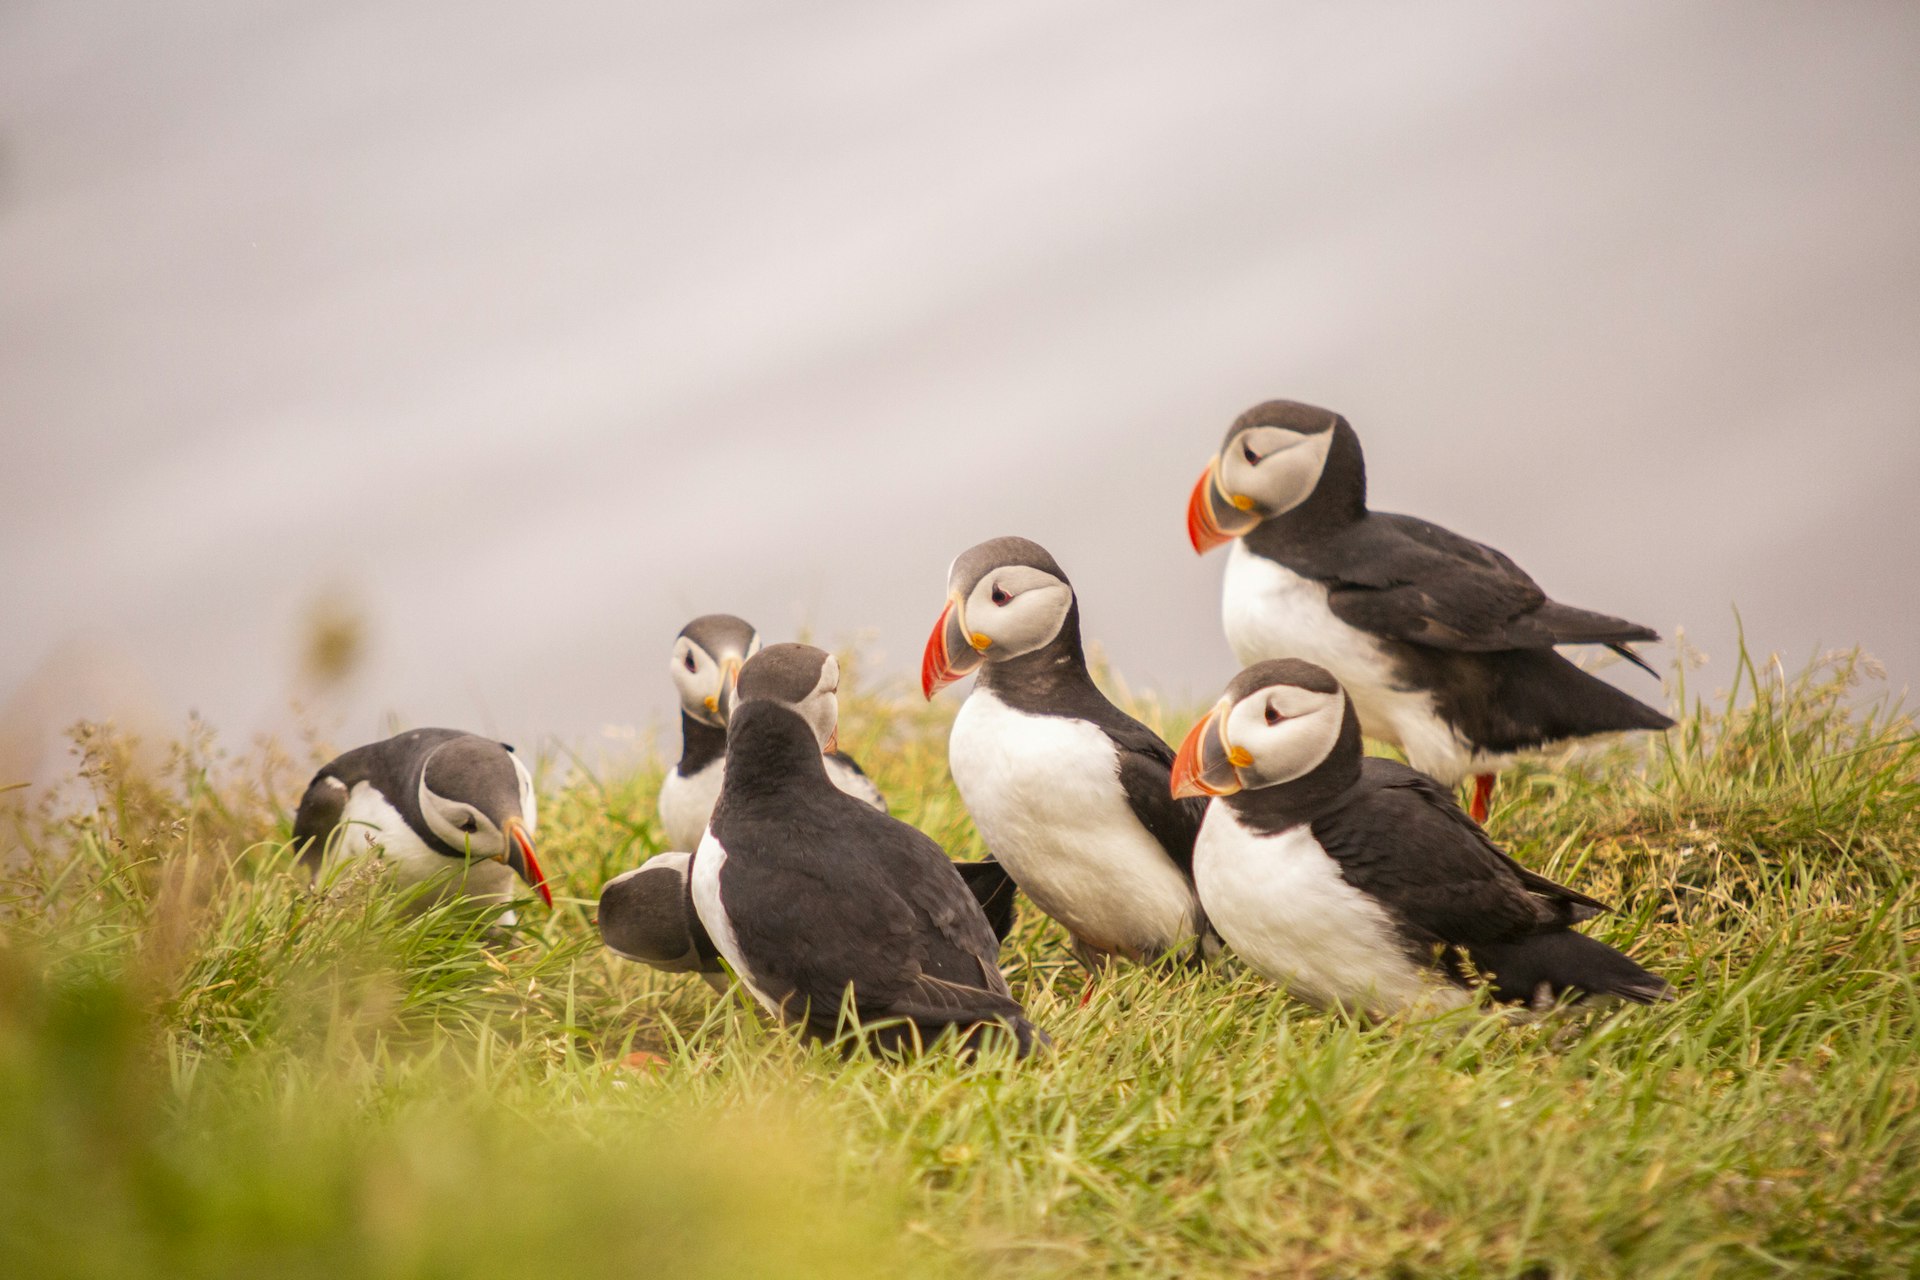 A group of black-and-white birds with colorful beaks on a clifftop